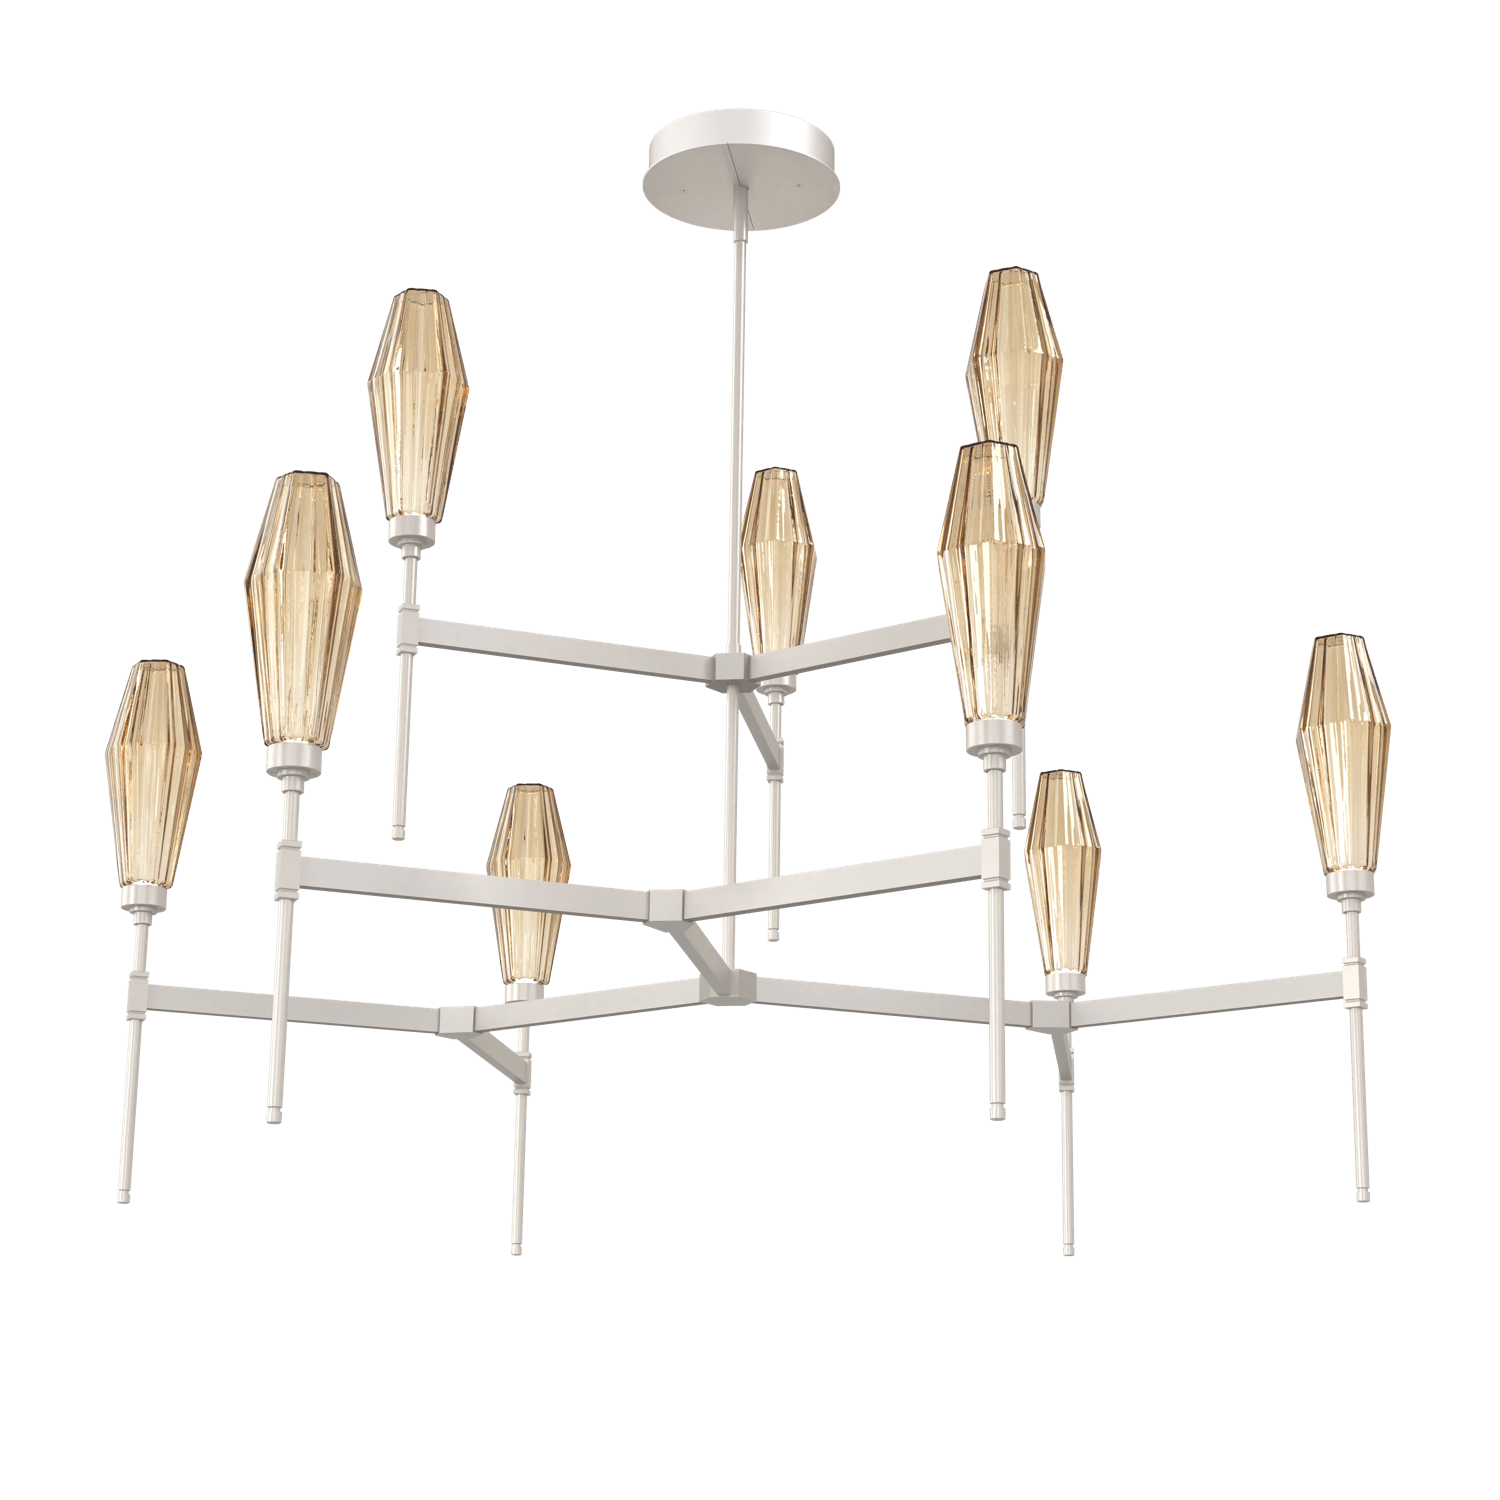 CHB0049-54-BS-RB-Hammerton-Studio-Aalto-54-inch-round-two-tier-belvedere-chandelier-with-metallic-beige-silver-finish-and-optic-ribbed-bronze-glass-shades-and-LED-lamping